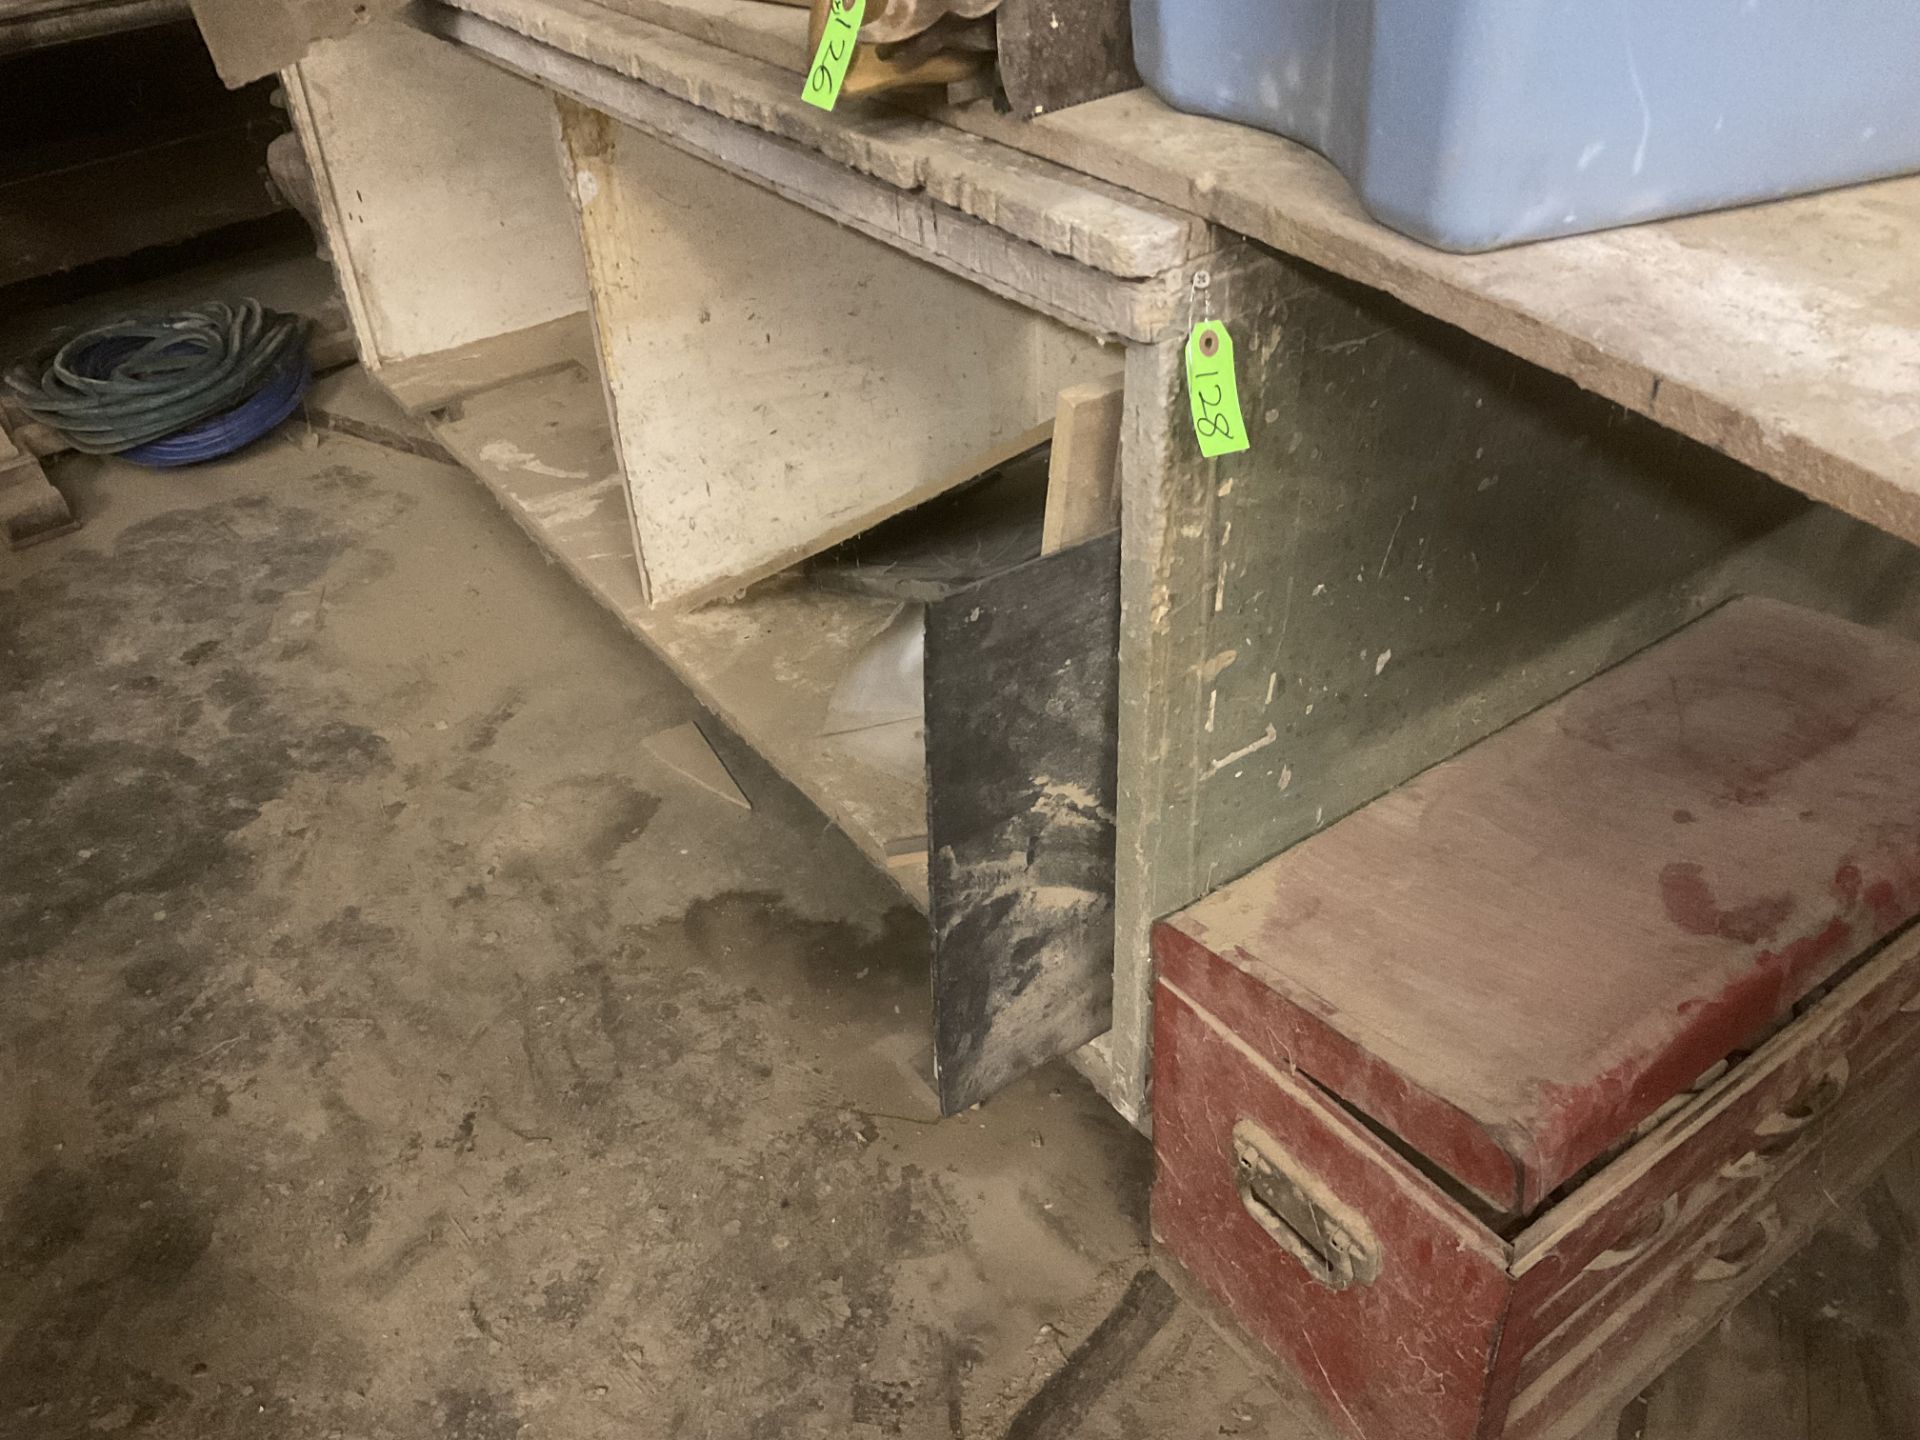 6Ft, x 4 ft. Work bench with contents inside NOT contents on top.